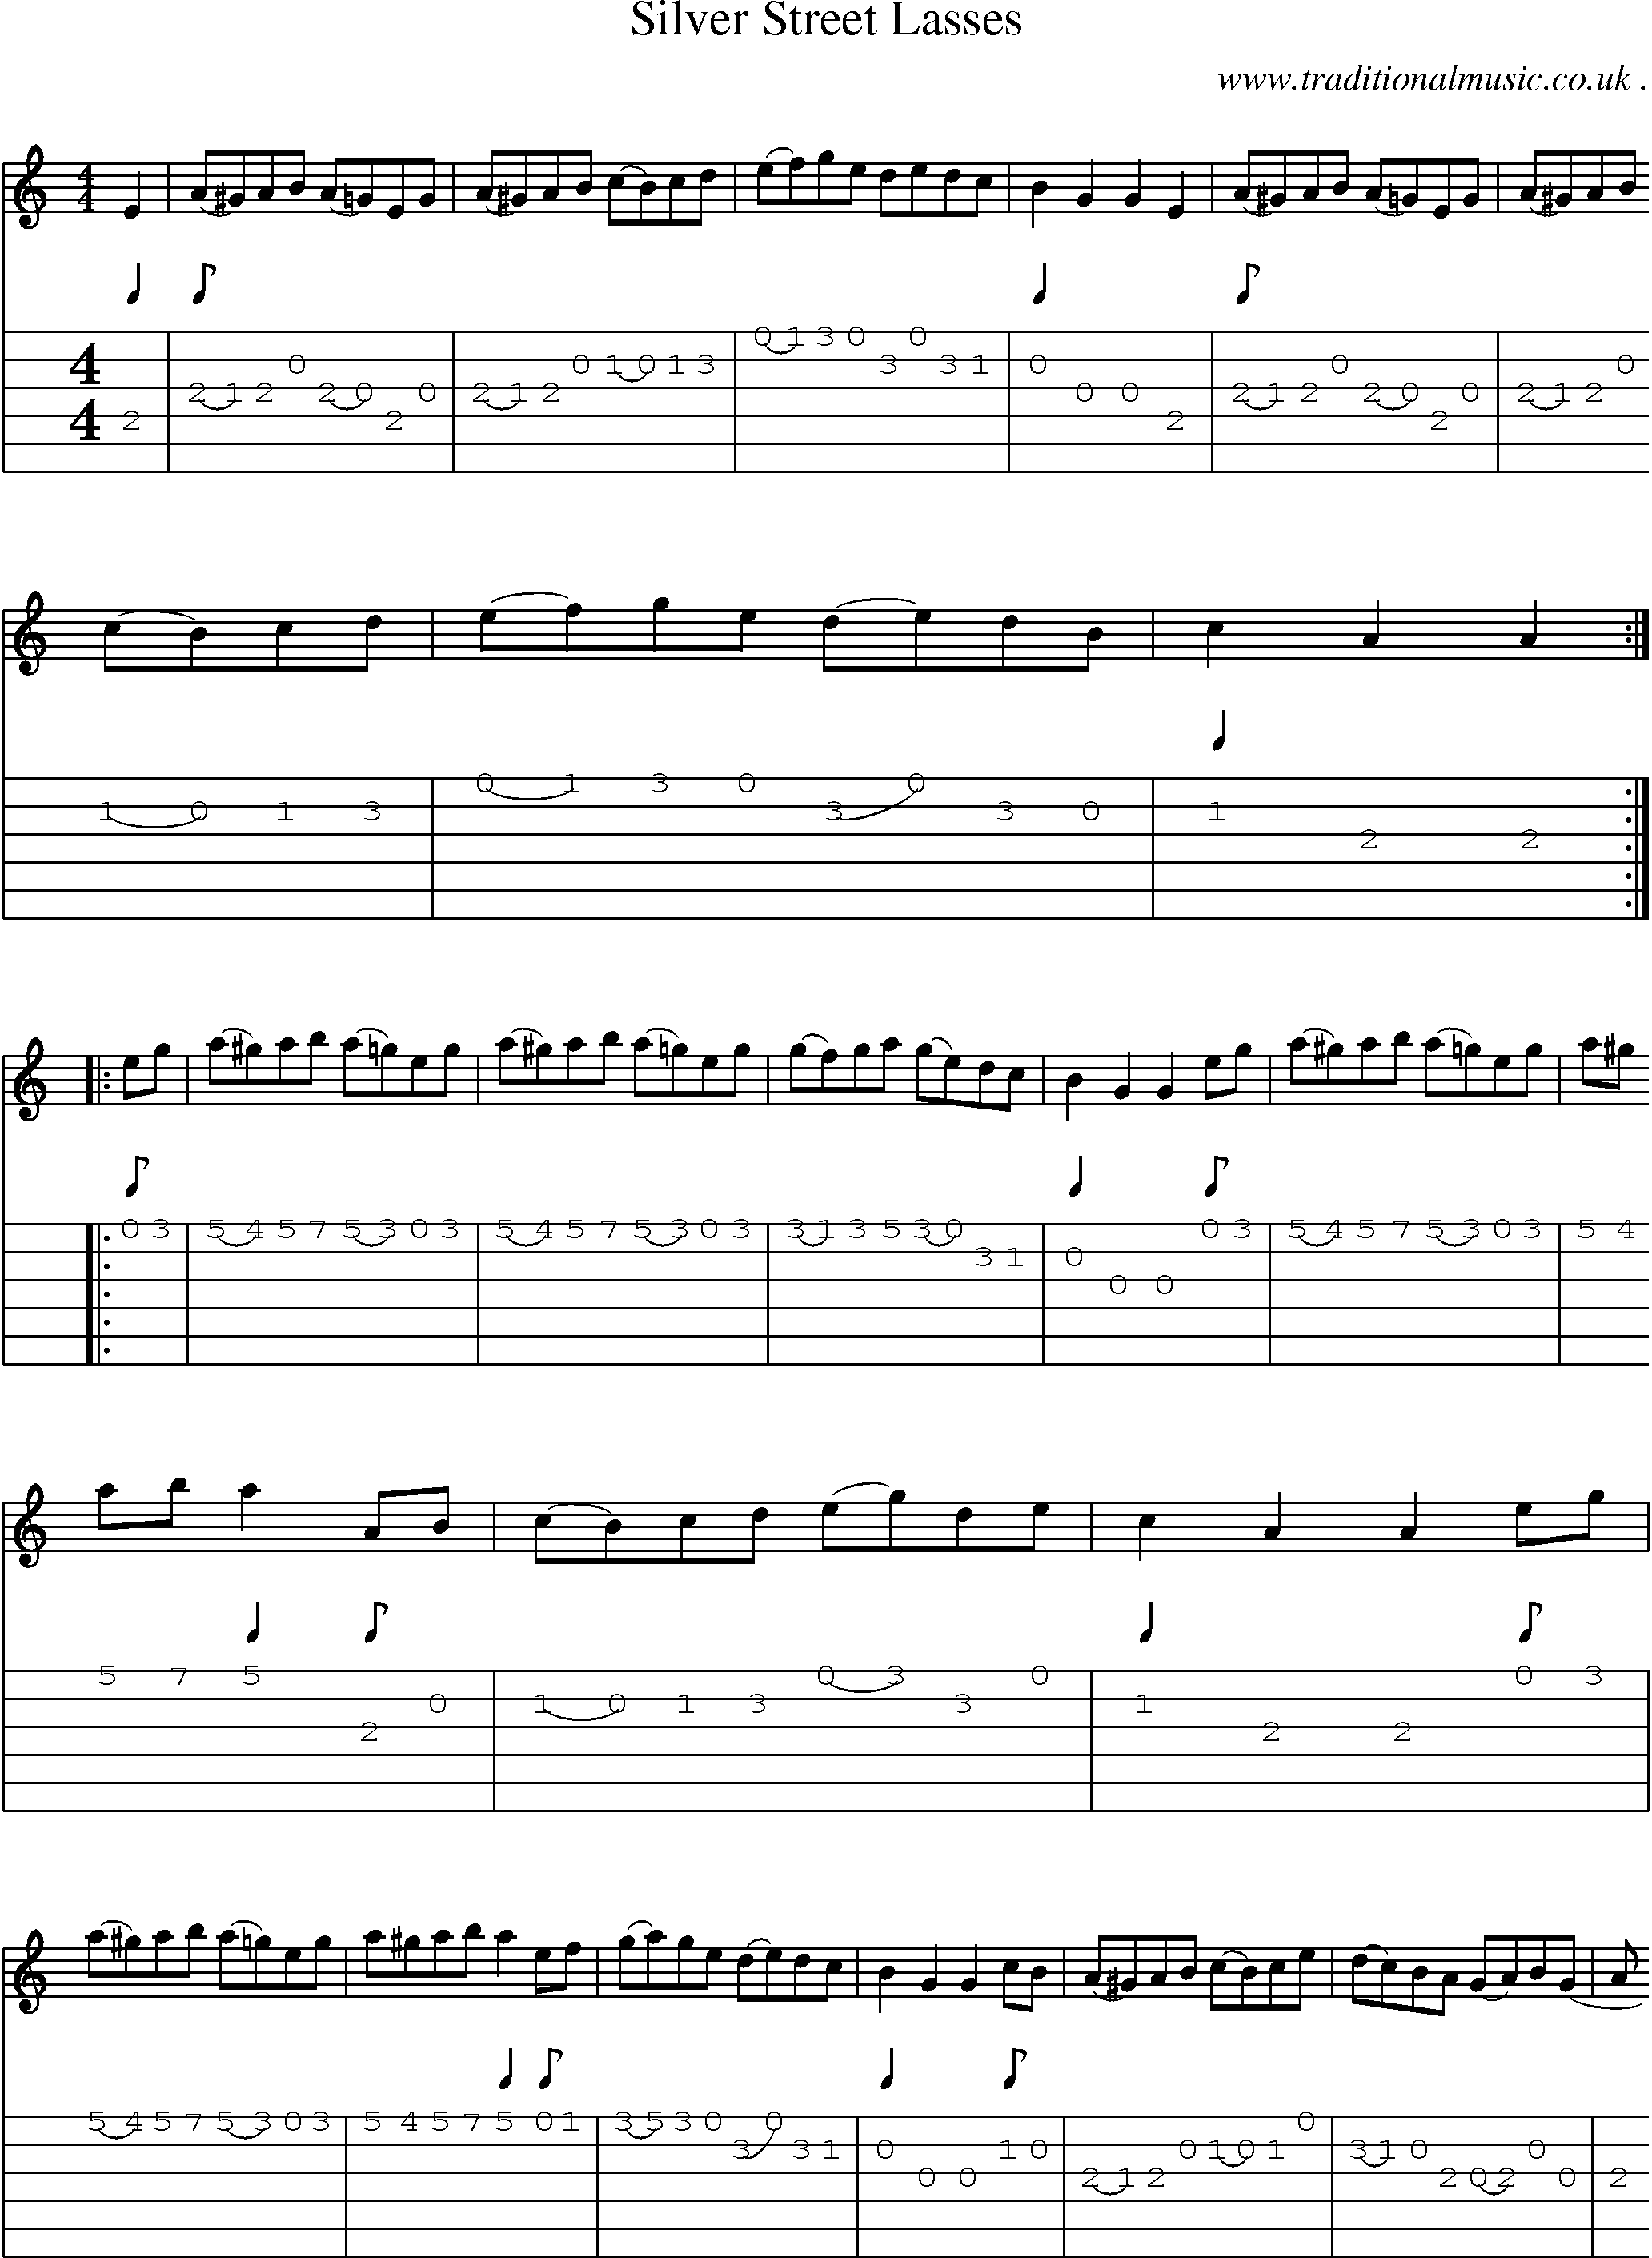 Sheet-Music and Guitar Tabs for Silver Street Lasses